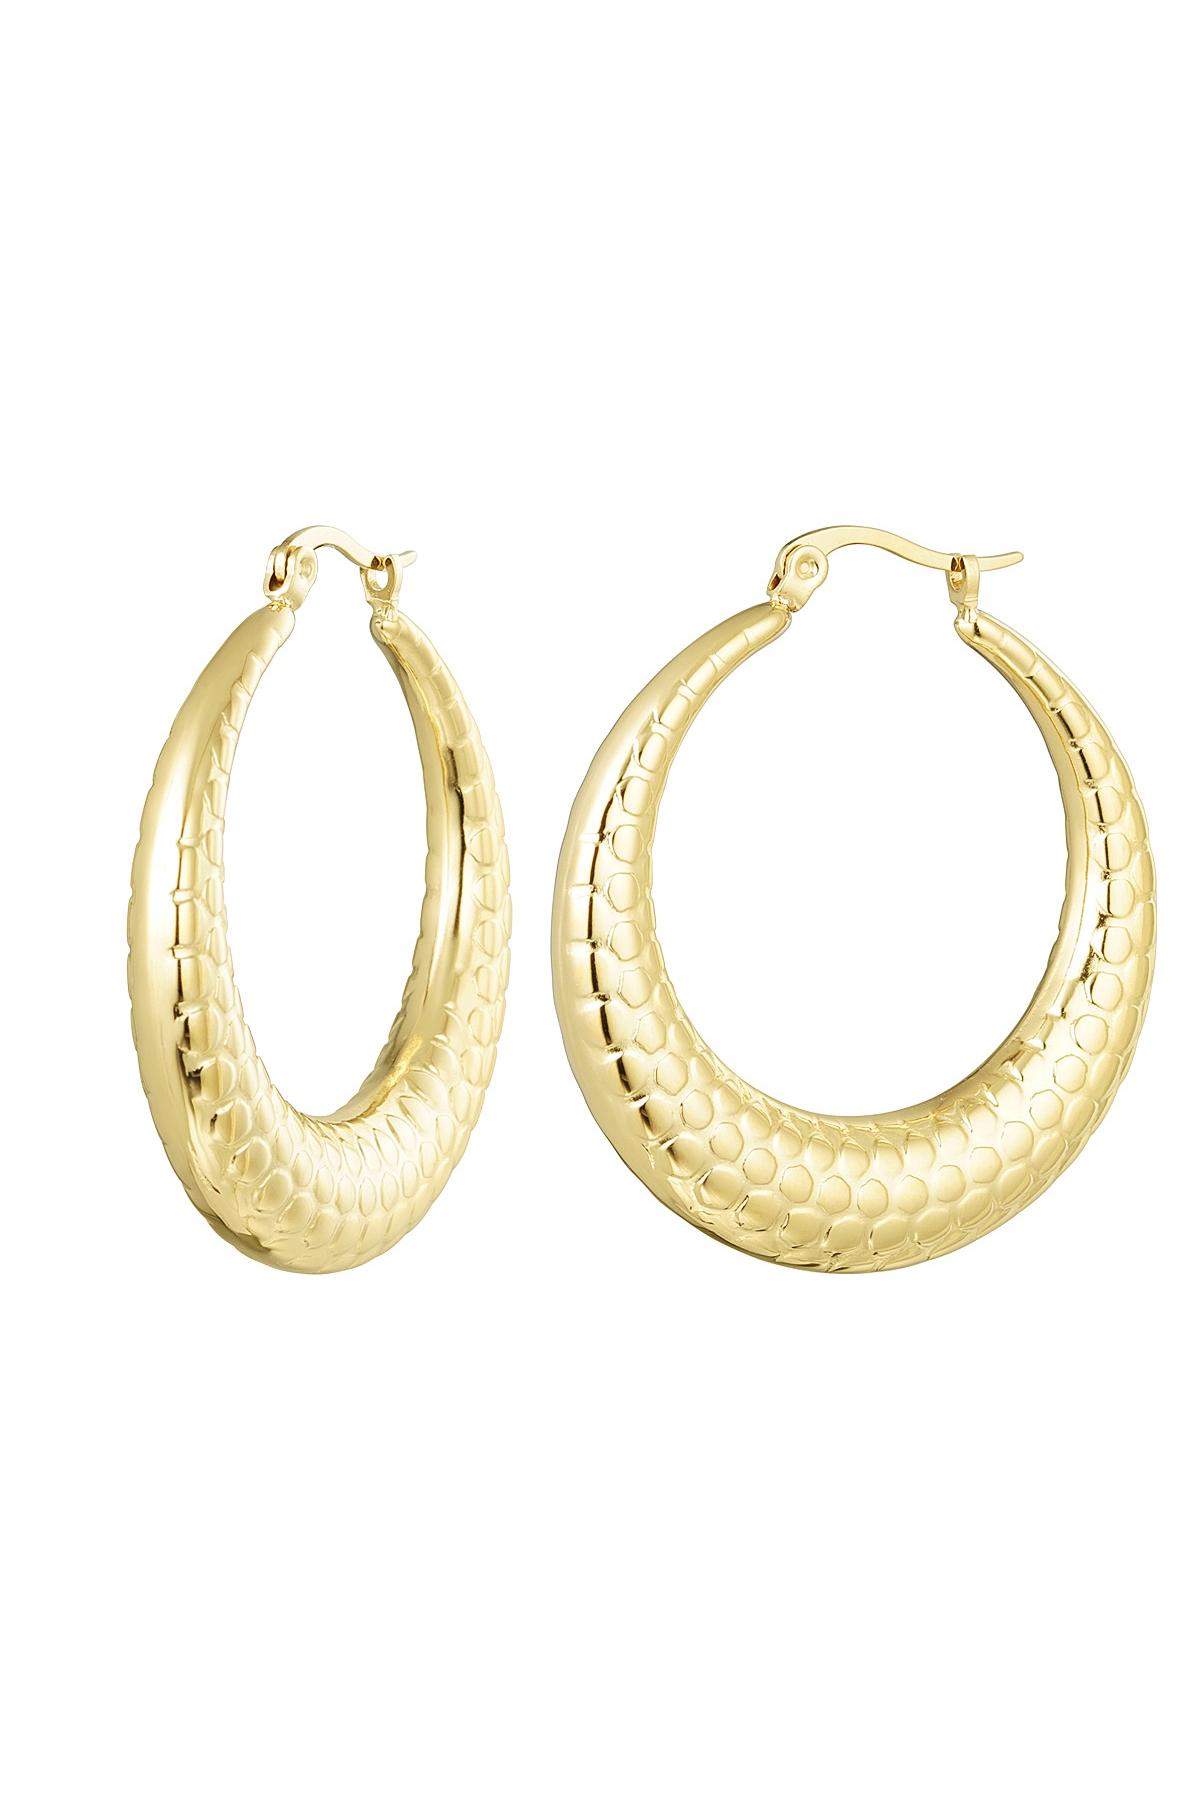 Earrings bubble print large Gold Stainless Steel h5 